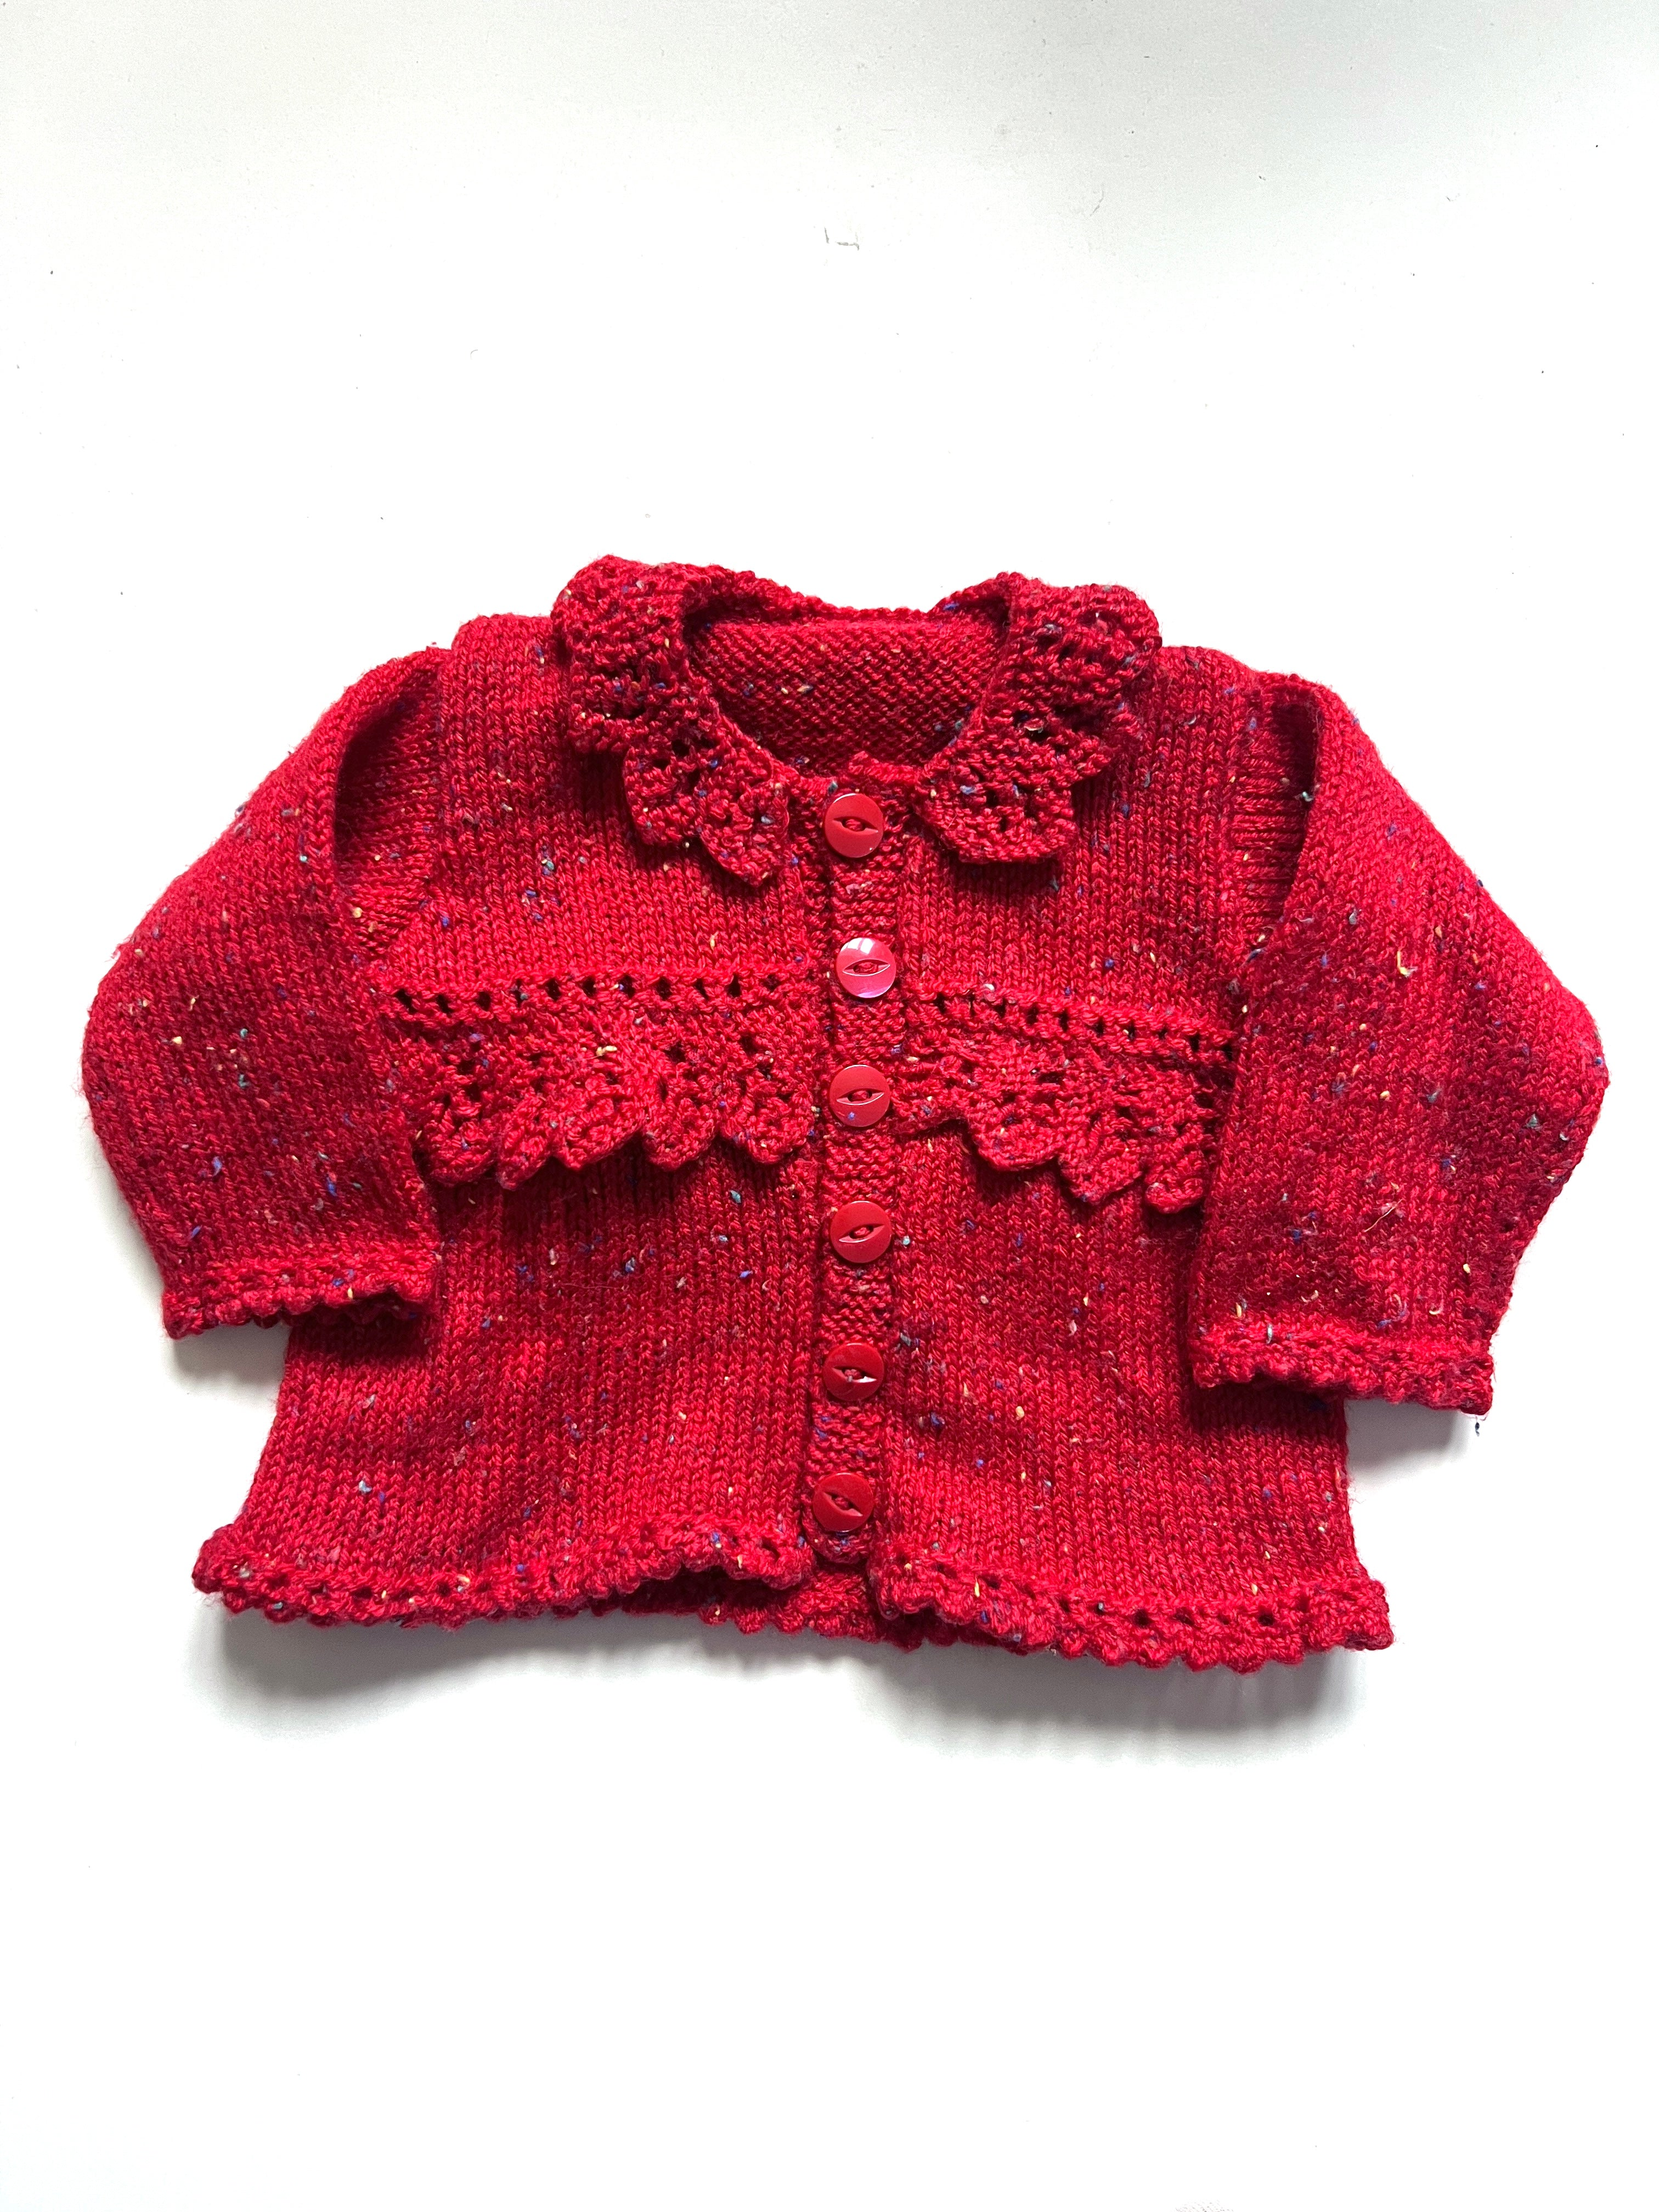 Vintage Handknitted Confetti Cardigan Age 6-12 Months